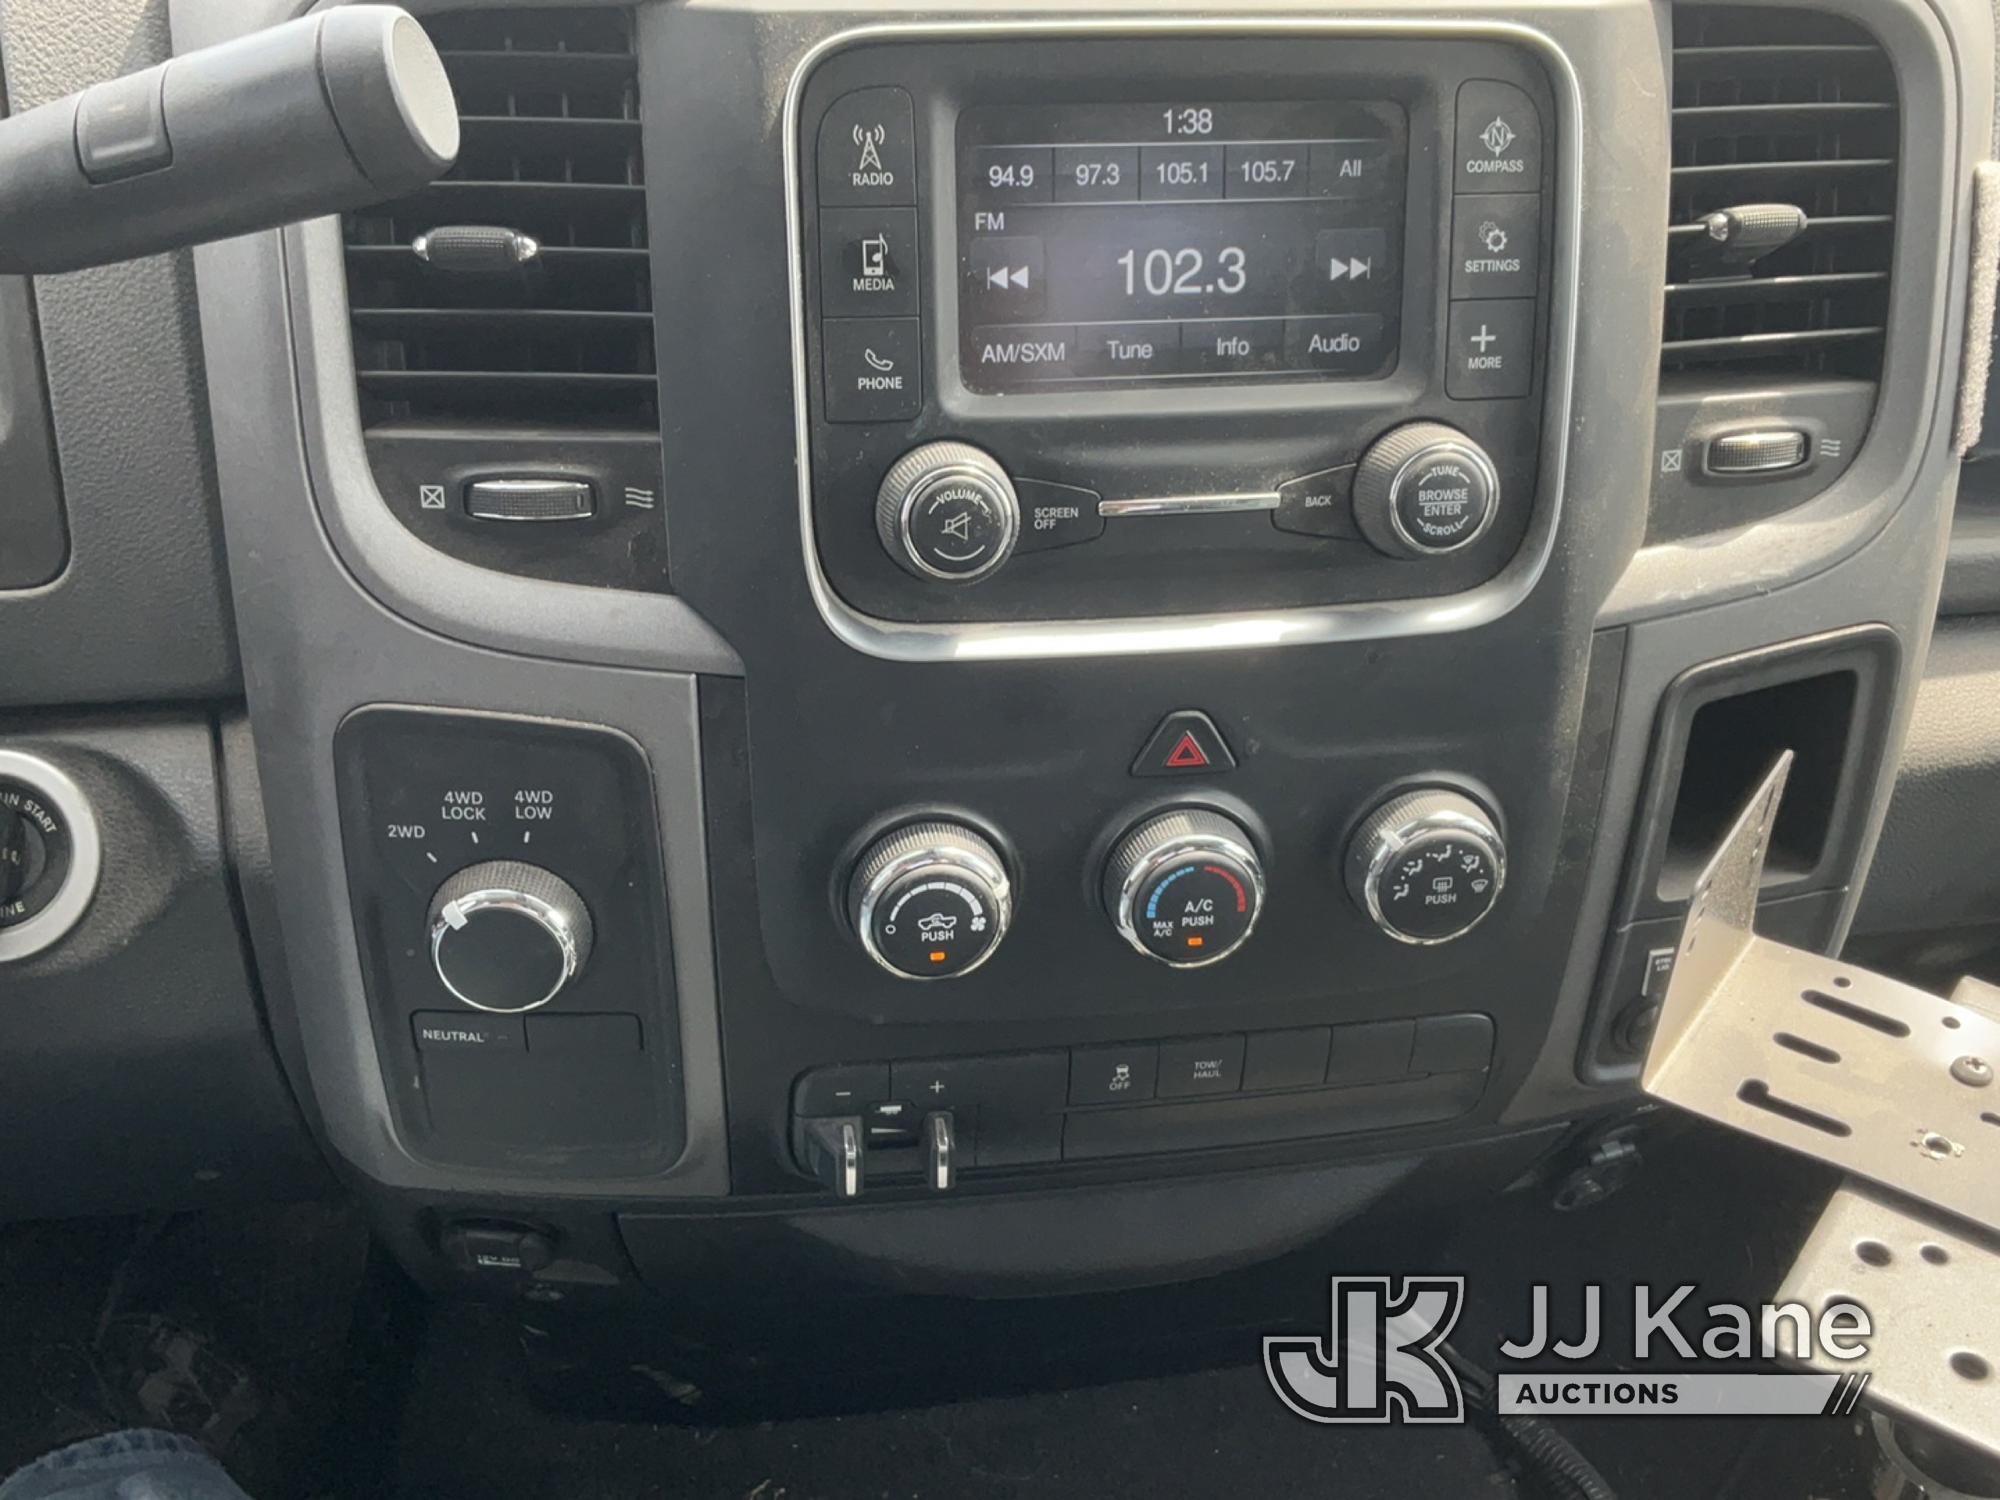 (Chester Springs, PA) 2015 RAM 1500 4x4 Extended-Cab Pickup Truck Runs & Moves, Body & Rust Damage)